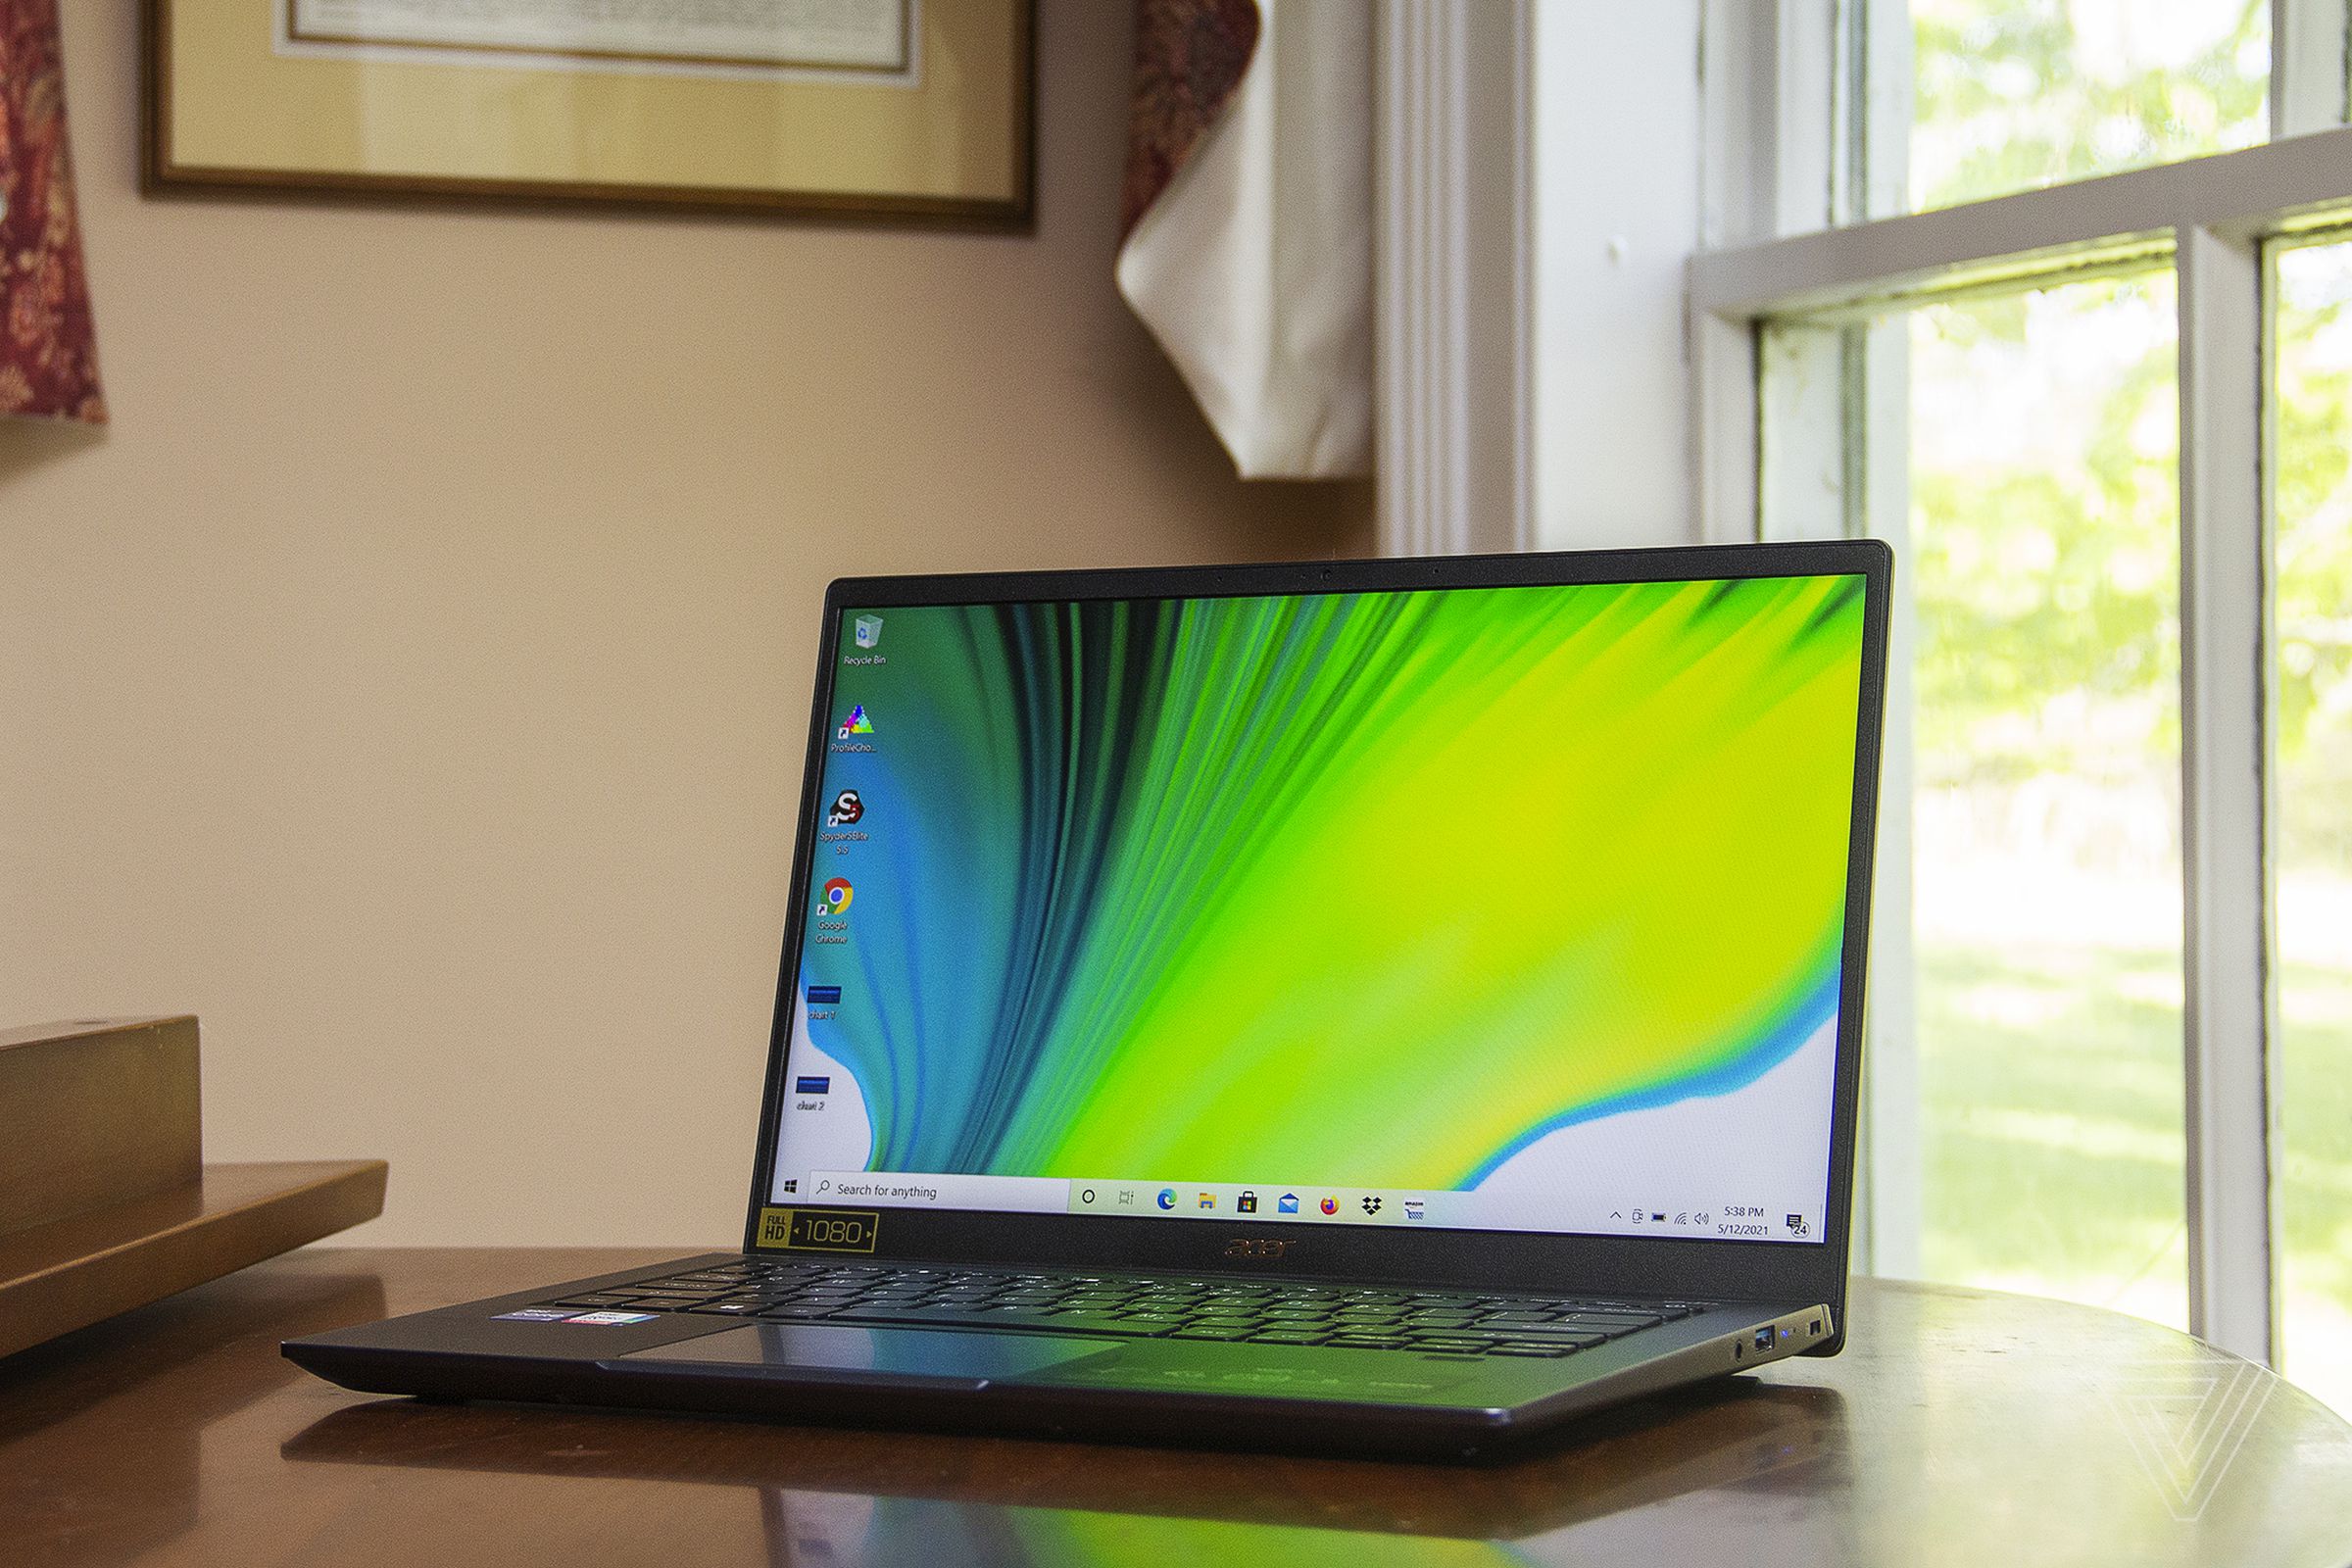 The Acer Swift 3X open on a piano, angled to the left. The screen displays a blue, green, and white gradient.